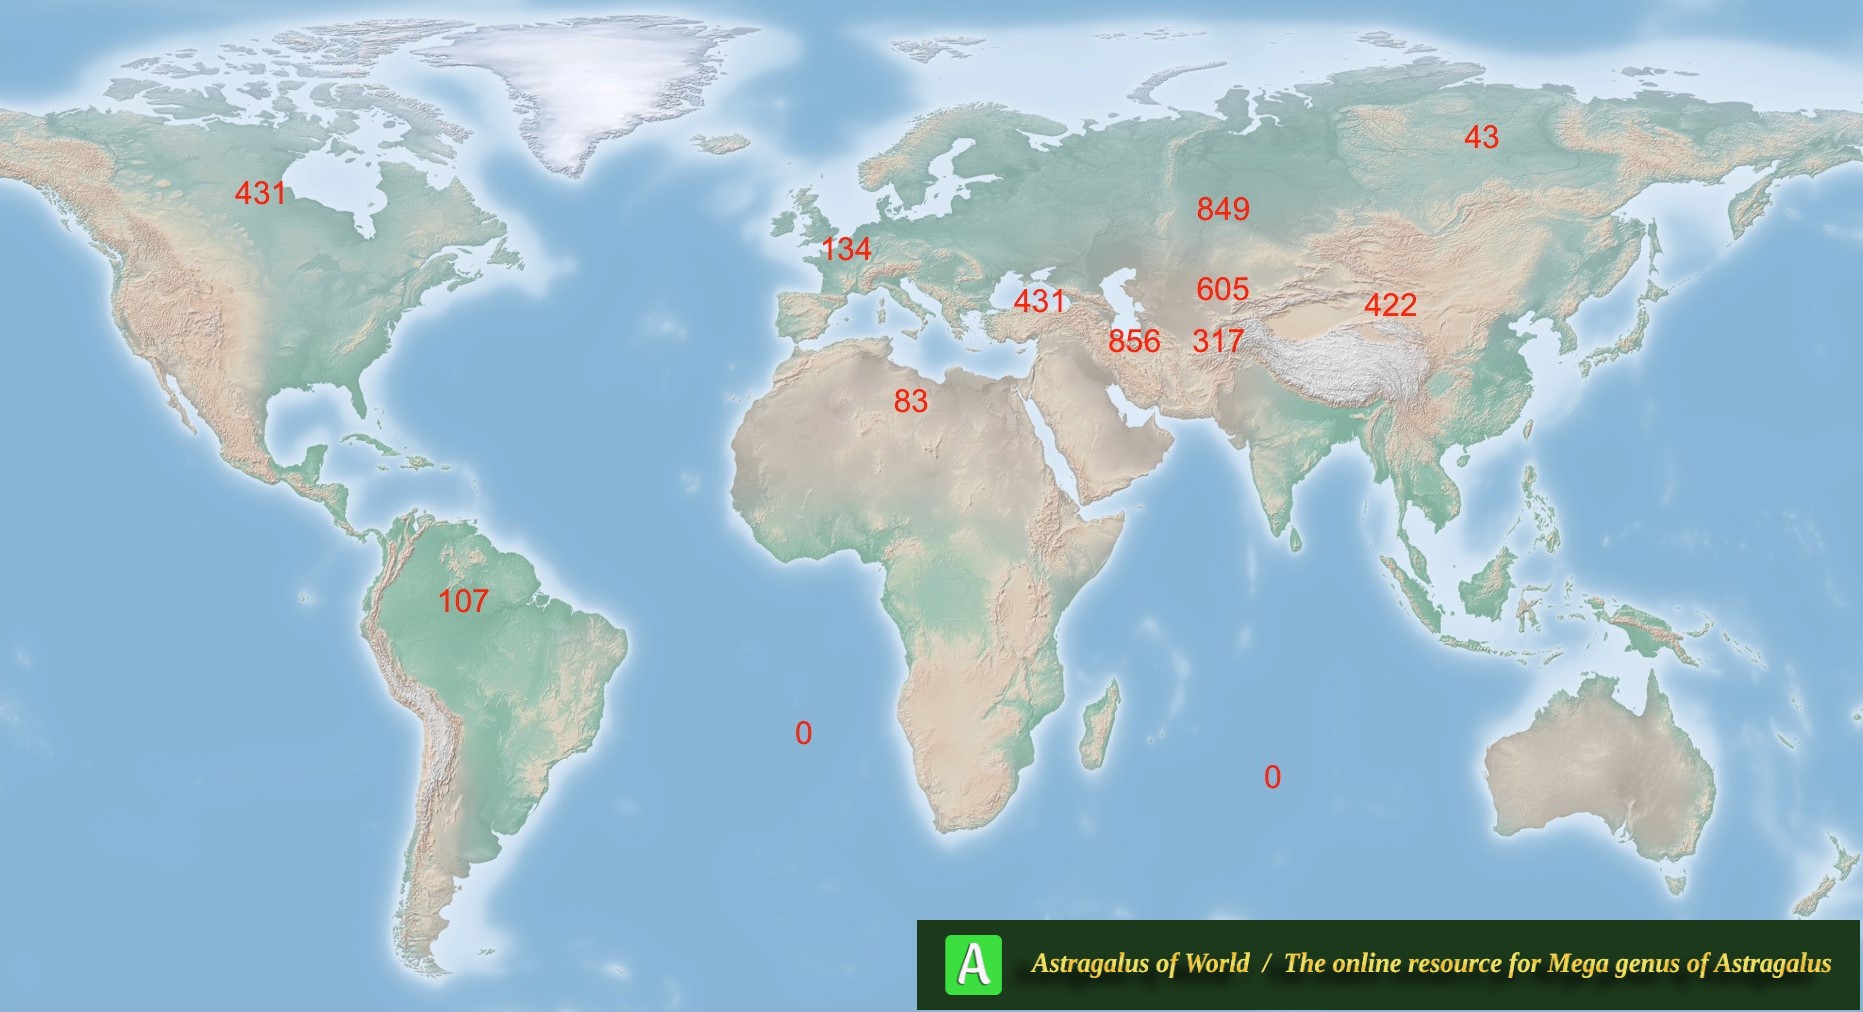 Total number of species in Old and New World